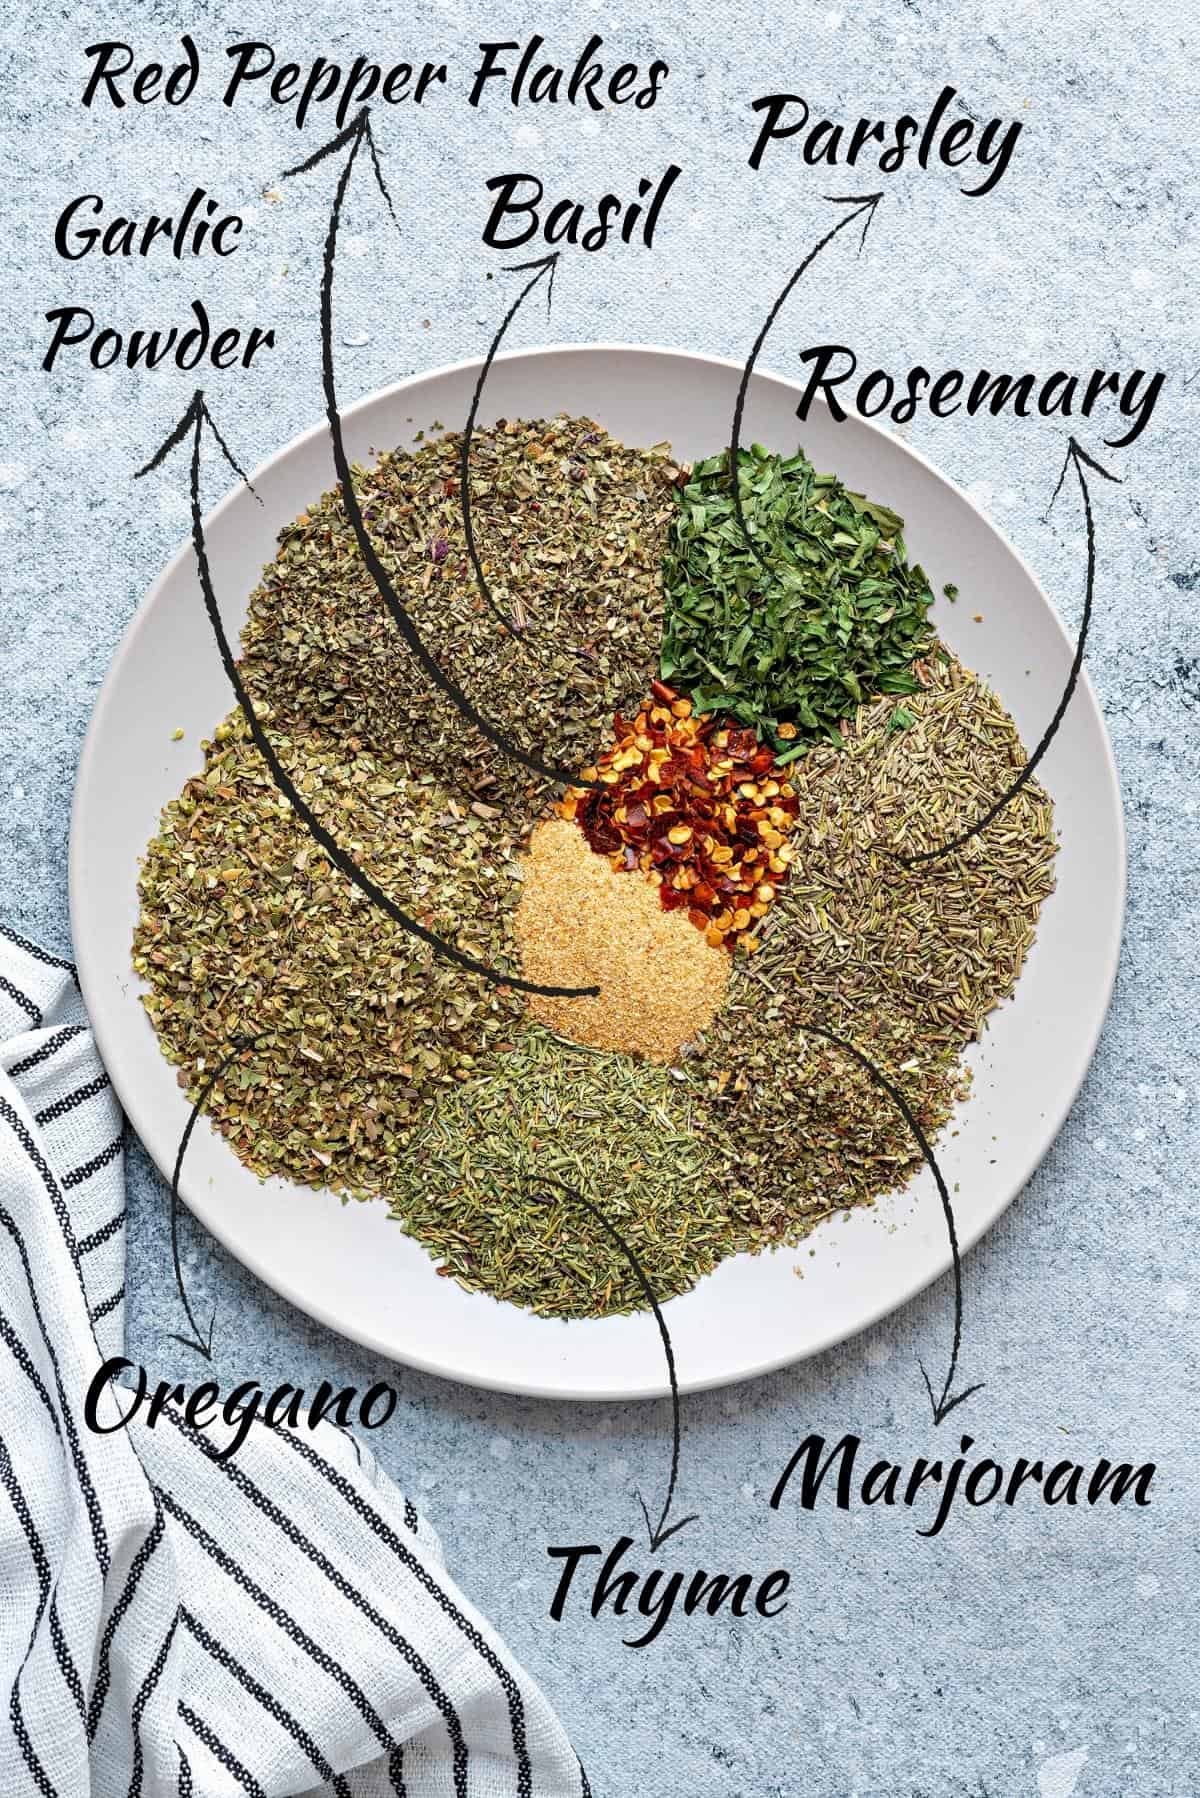 Italian Dried herbs and spices measured out and kept on a plate.